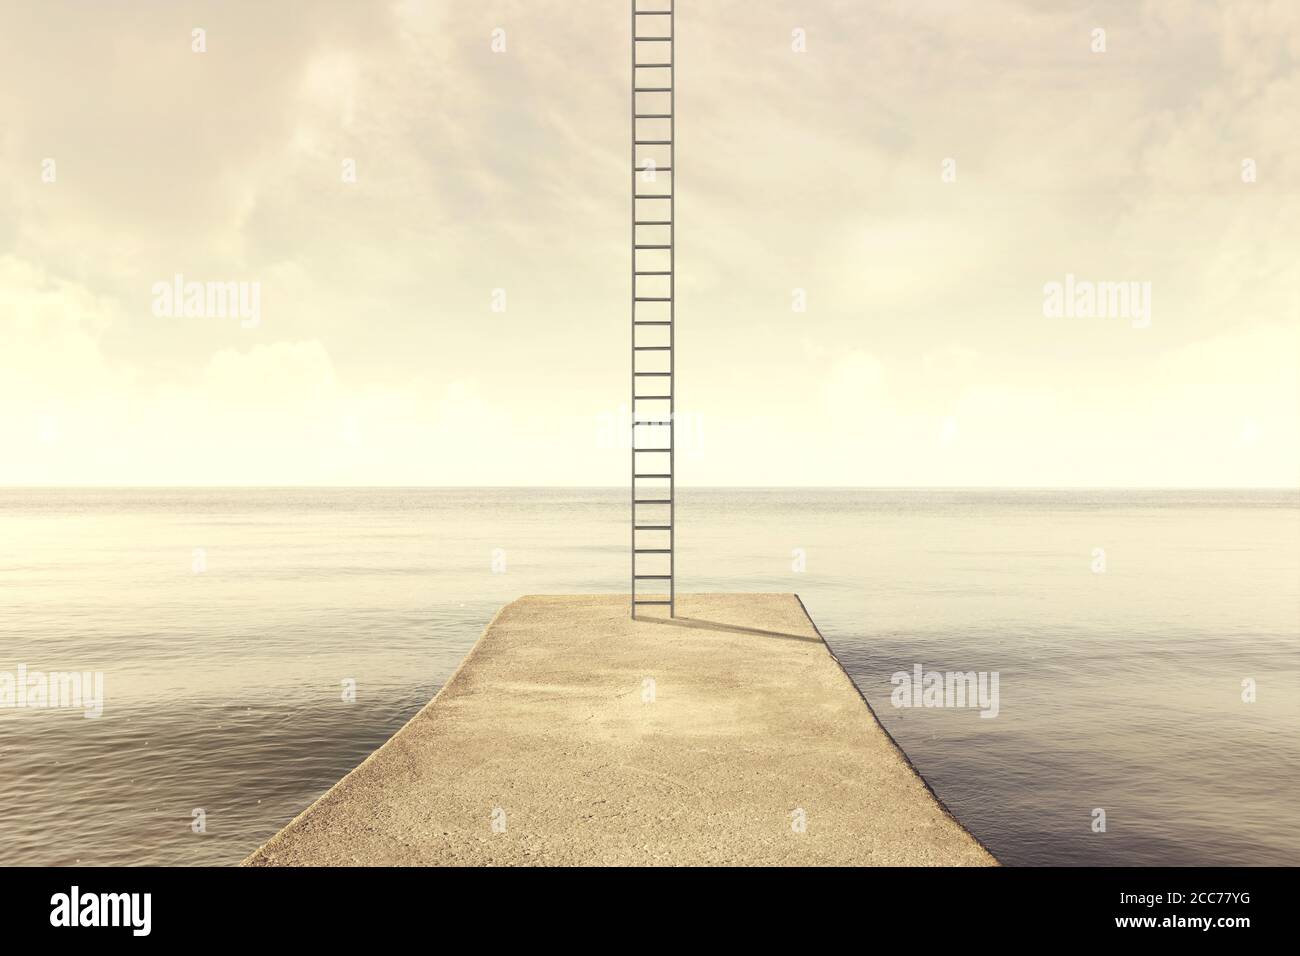 surreal ladder rises up into the sky in a silent sea landscape Stock Photo